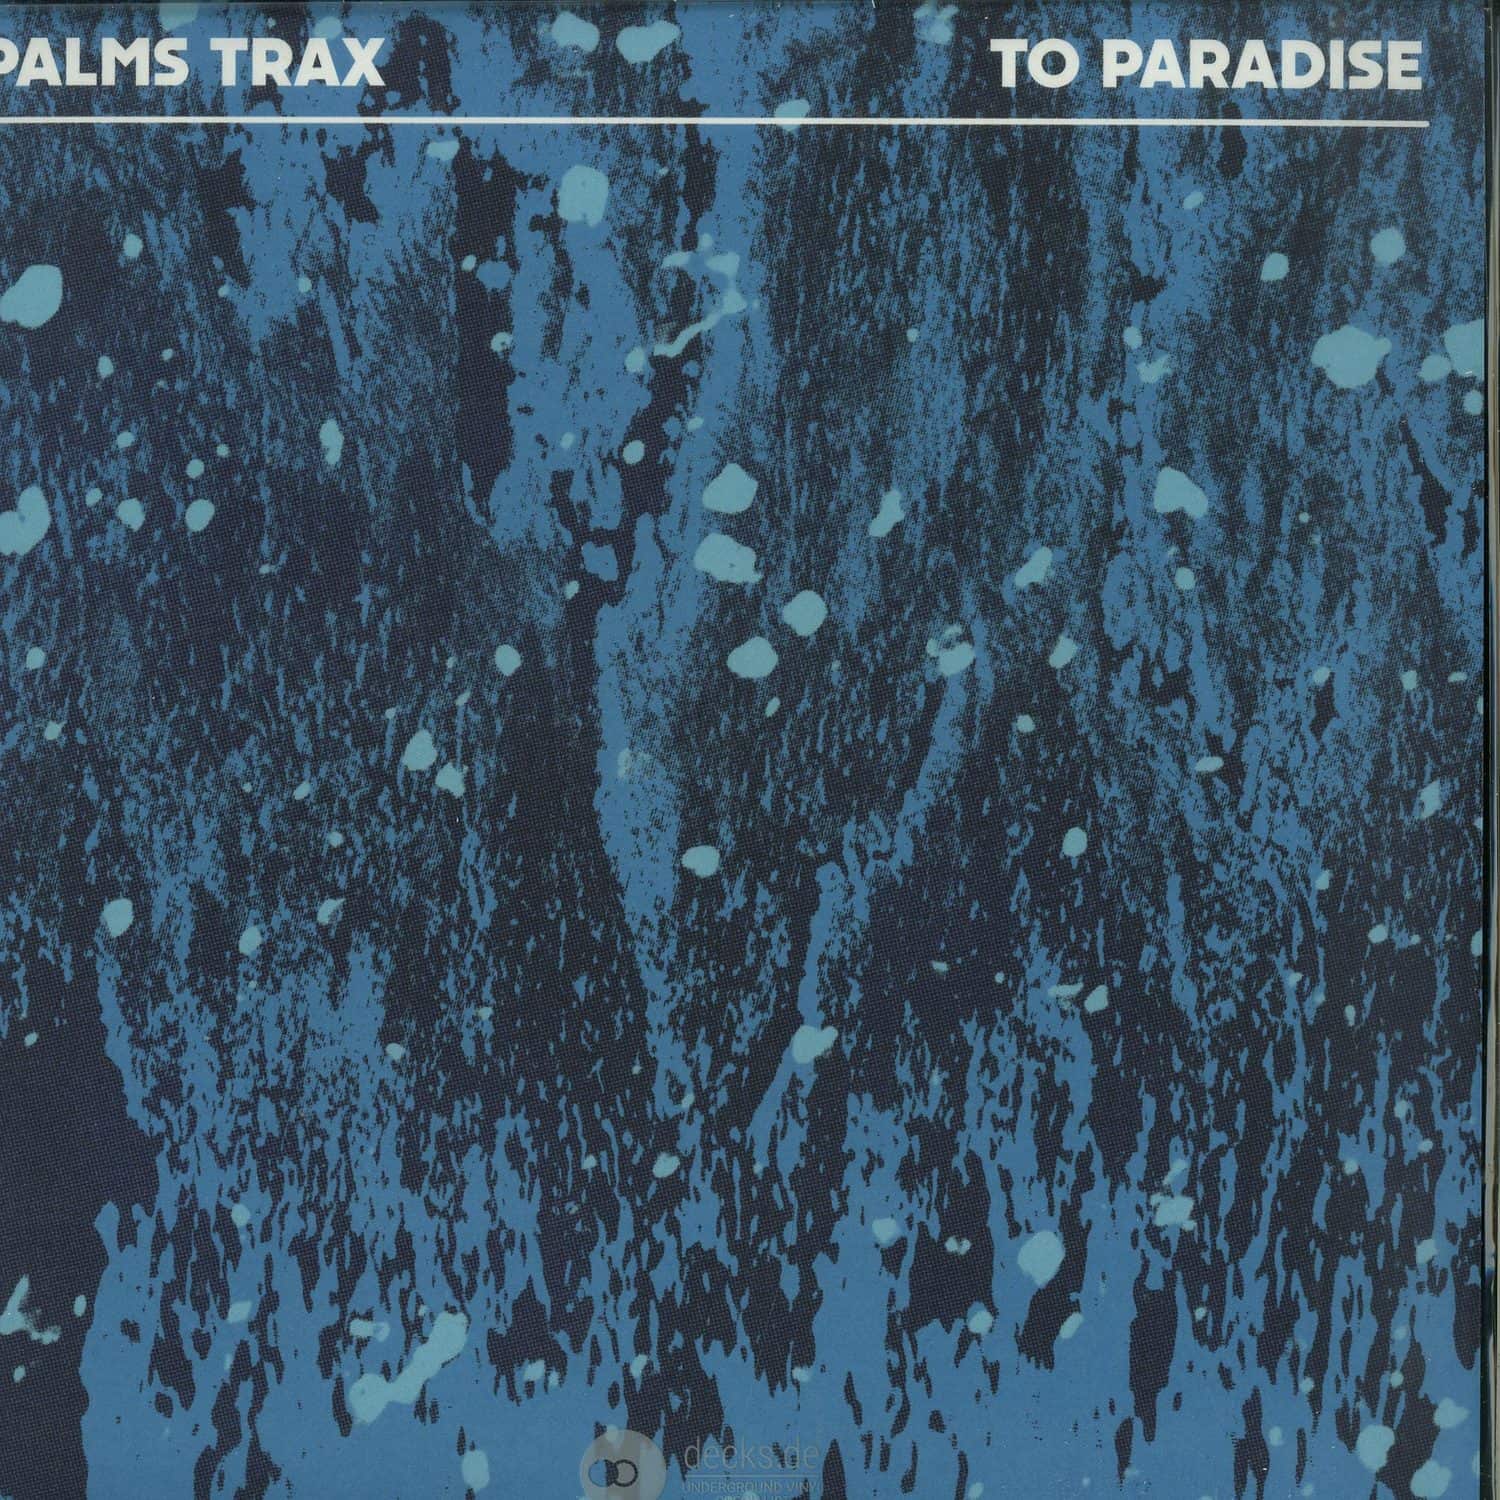 Palms Trax - TO PARADISE